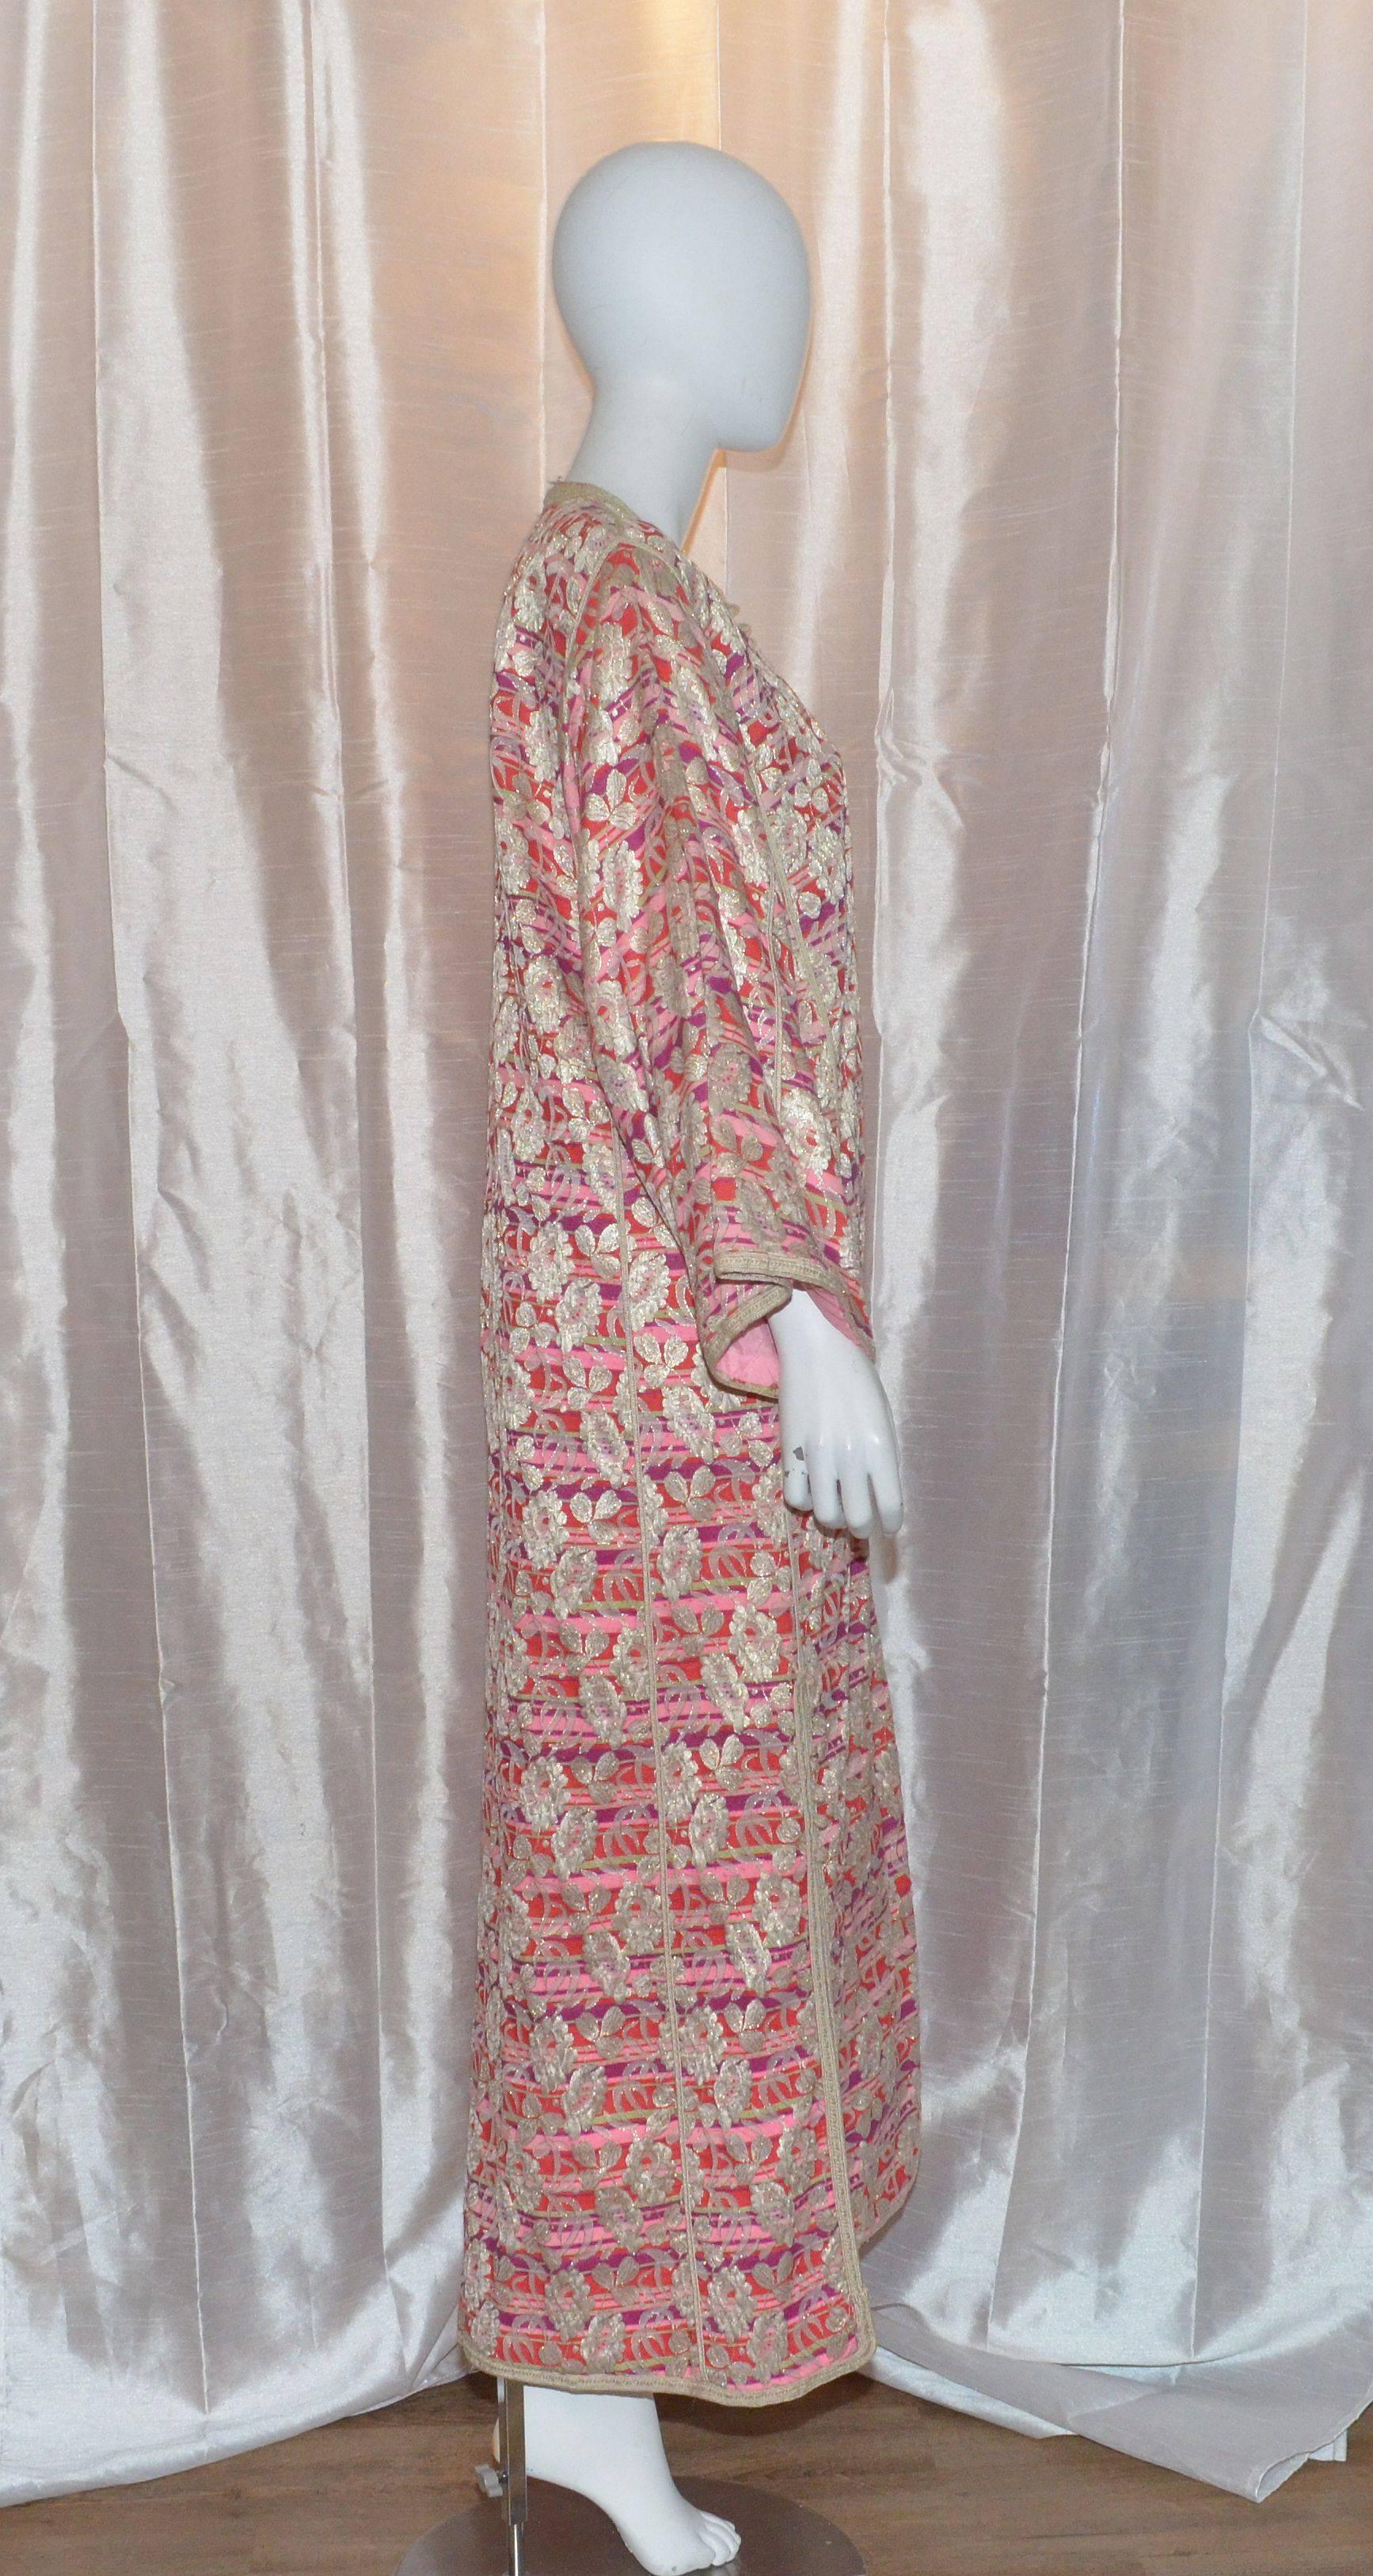 Vintage caftan in a fuchsia and purple striped pattern with metallic thread and floral brocade throughout. Optional button closures along the front and a zipper fastening. Caftan is fully lined in pale pink silk. 

Measurements:
Bust -